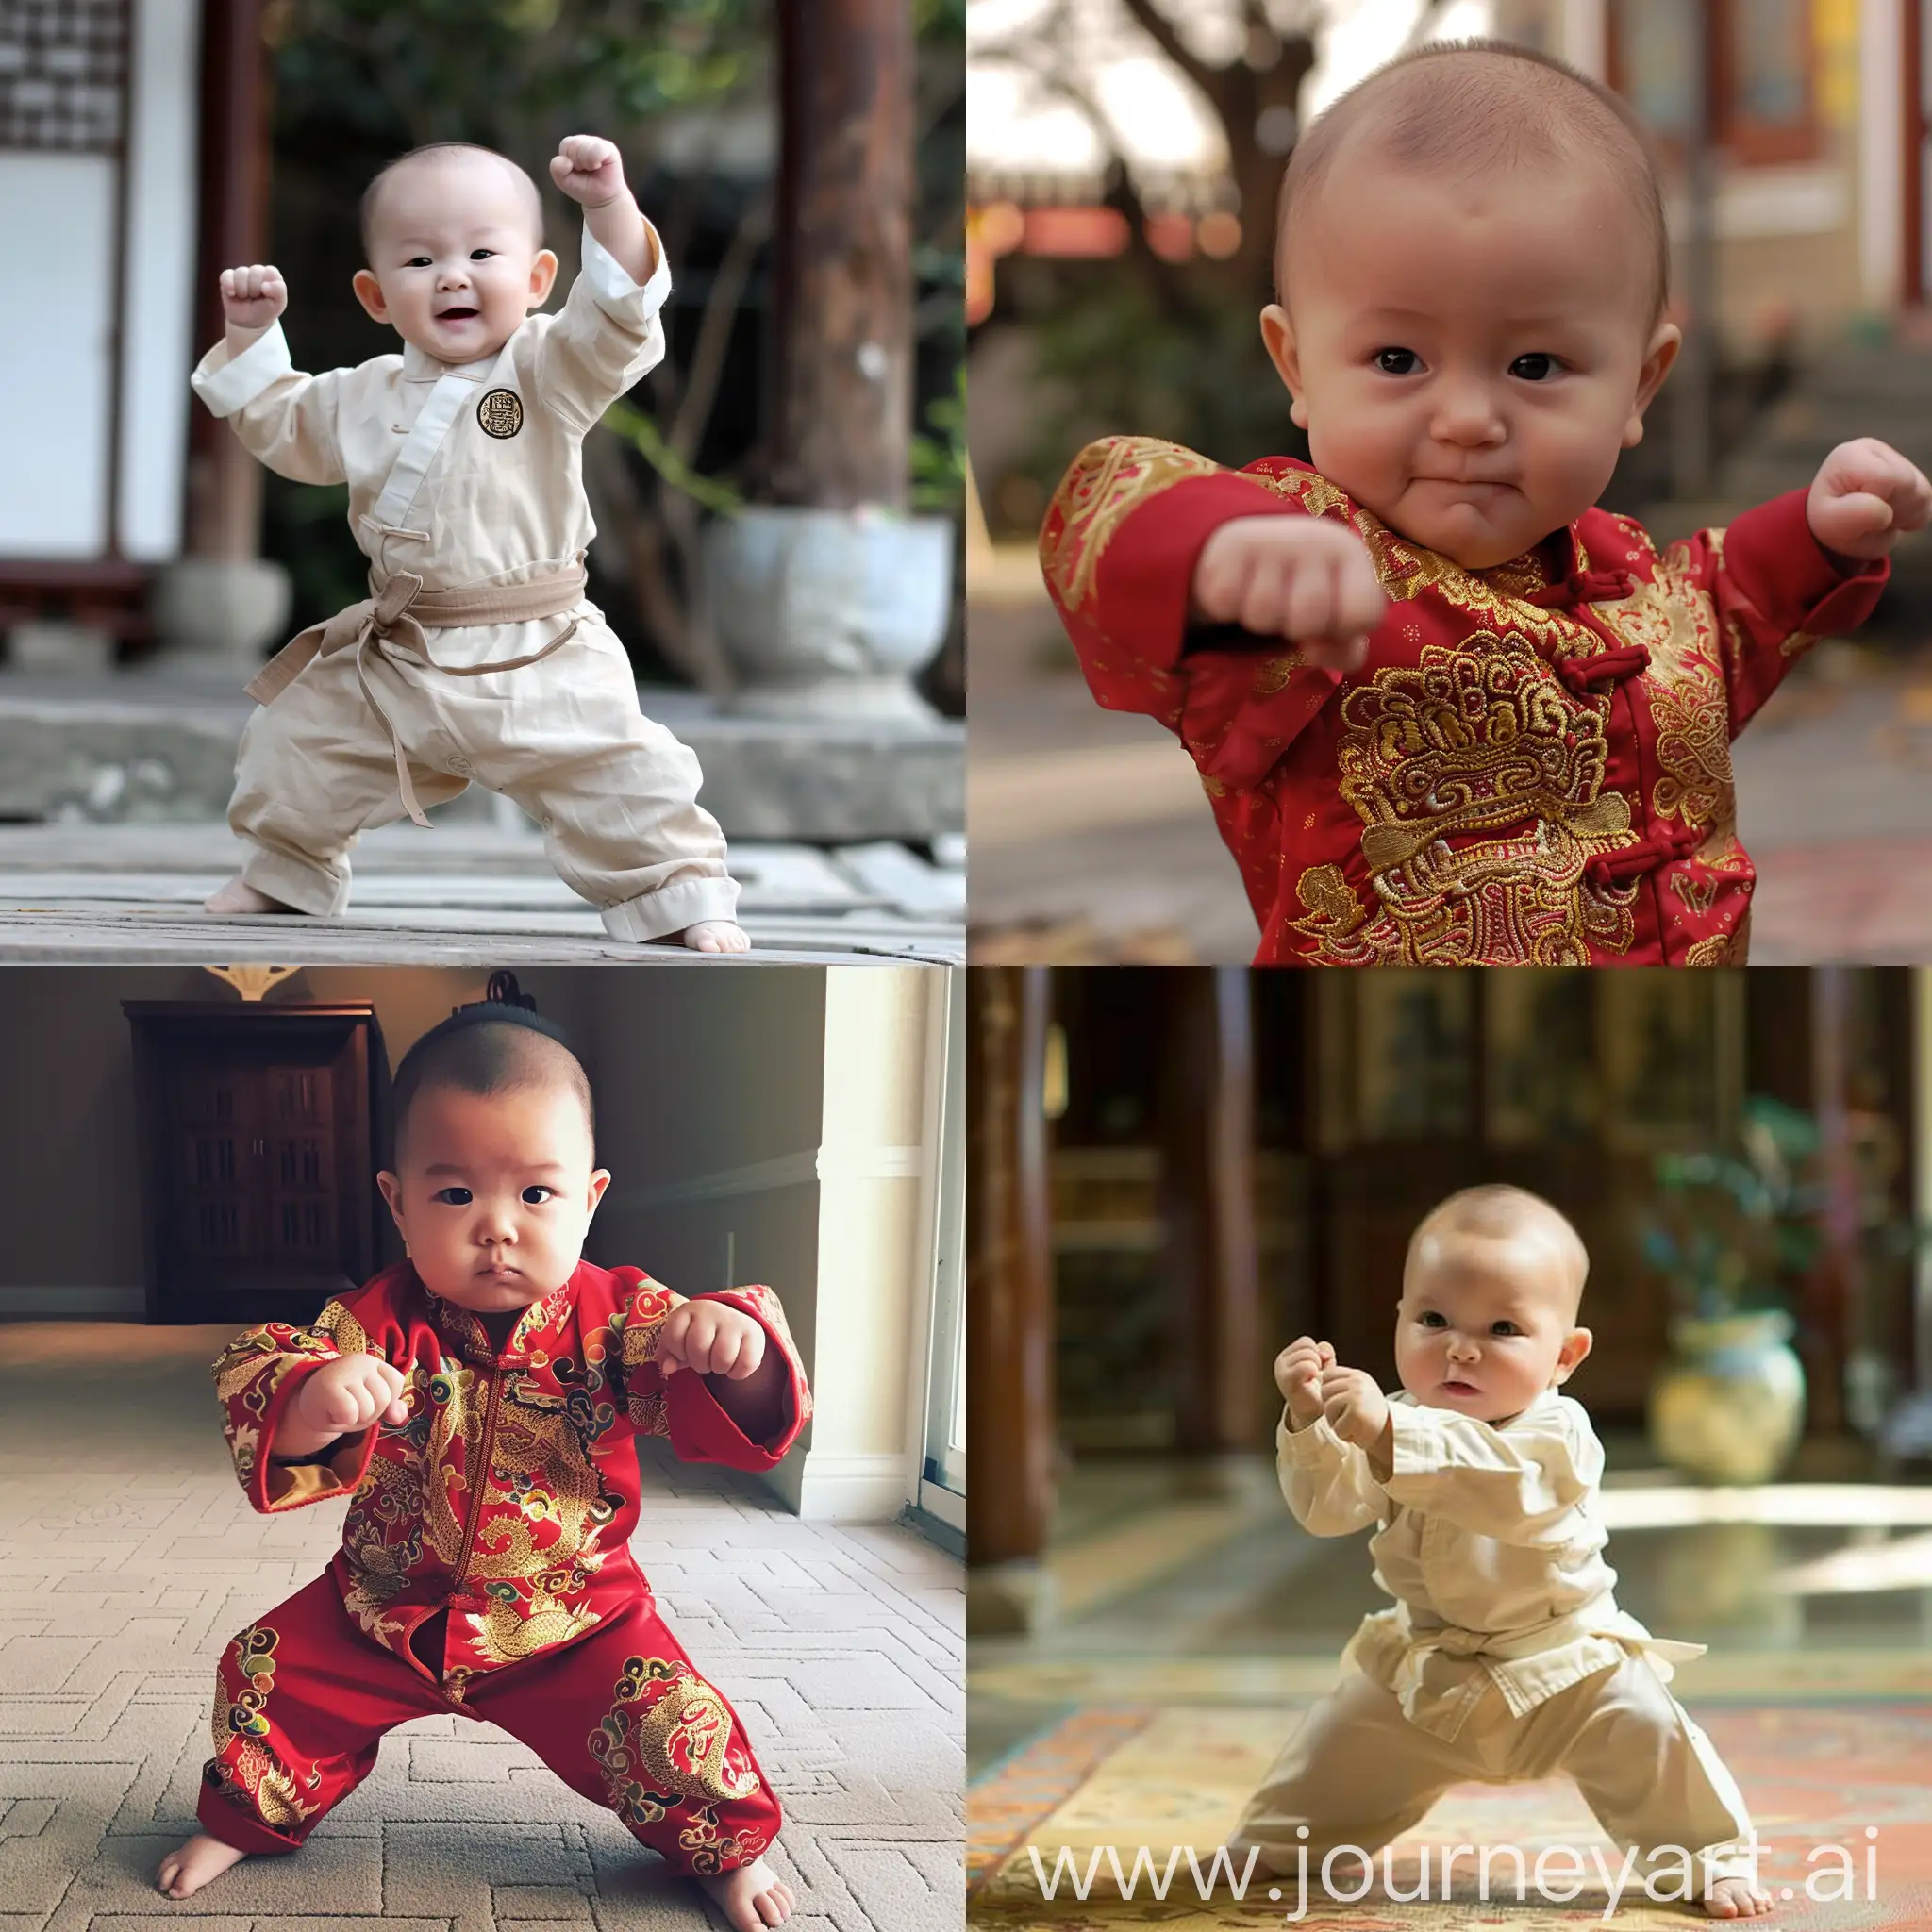 Adorable-Baby-Practicing-Kung-Fu-Moves-in-Square-Aspect-Ratio